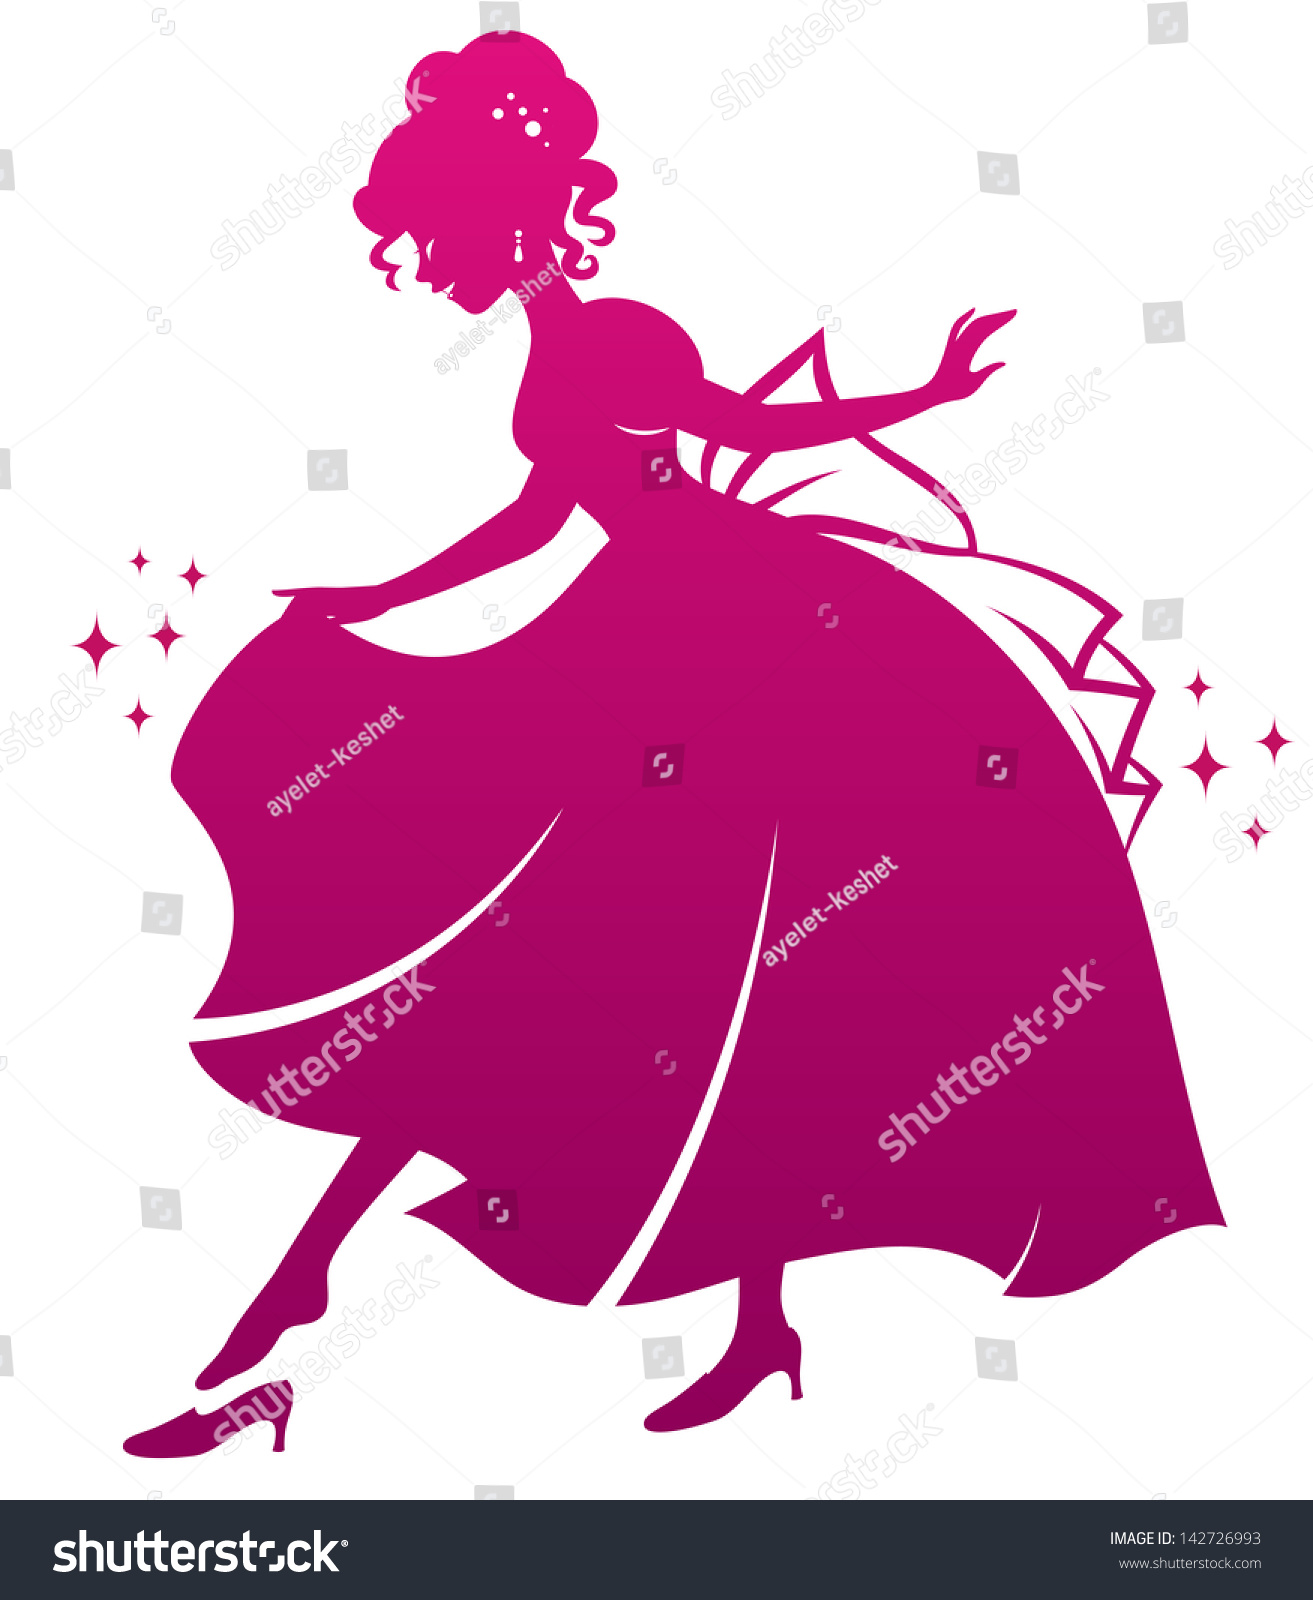 SVG of silhouette of Cinderella wearing her glass slipper svg